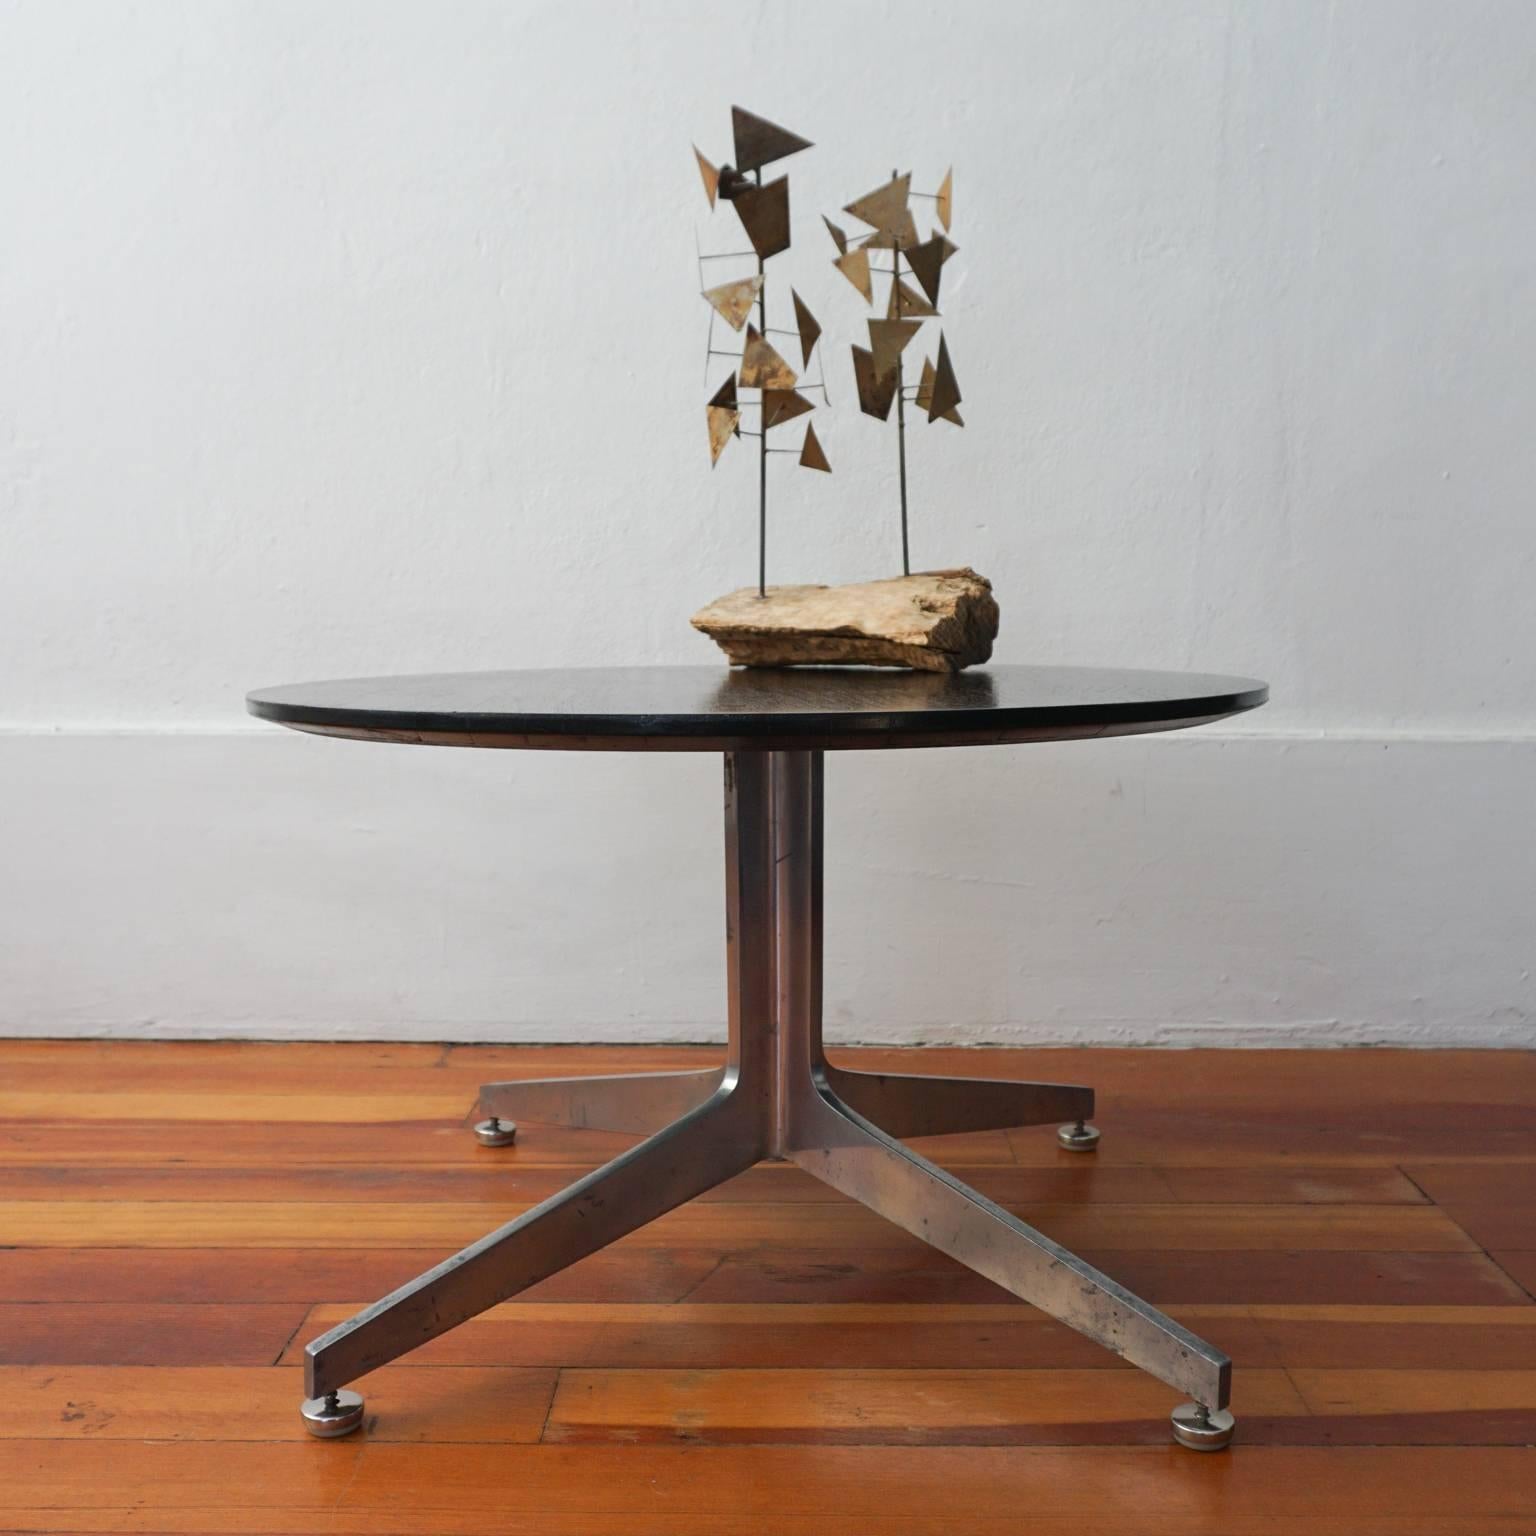 Designed by Ward Bennett for Lehigh Furniture Company. From Bennett's Column X Collection, which was launched in 1959. Solid aluminum base and wood top with black satin finish.